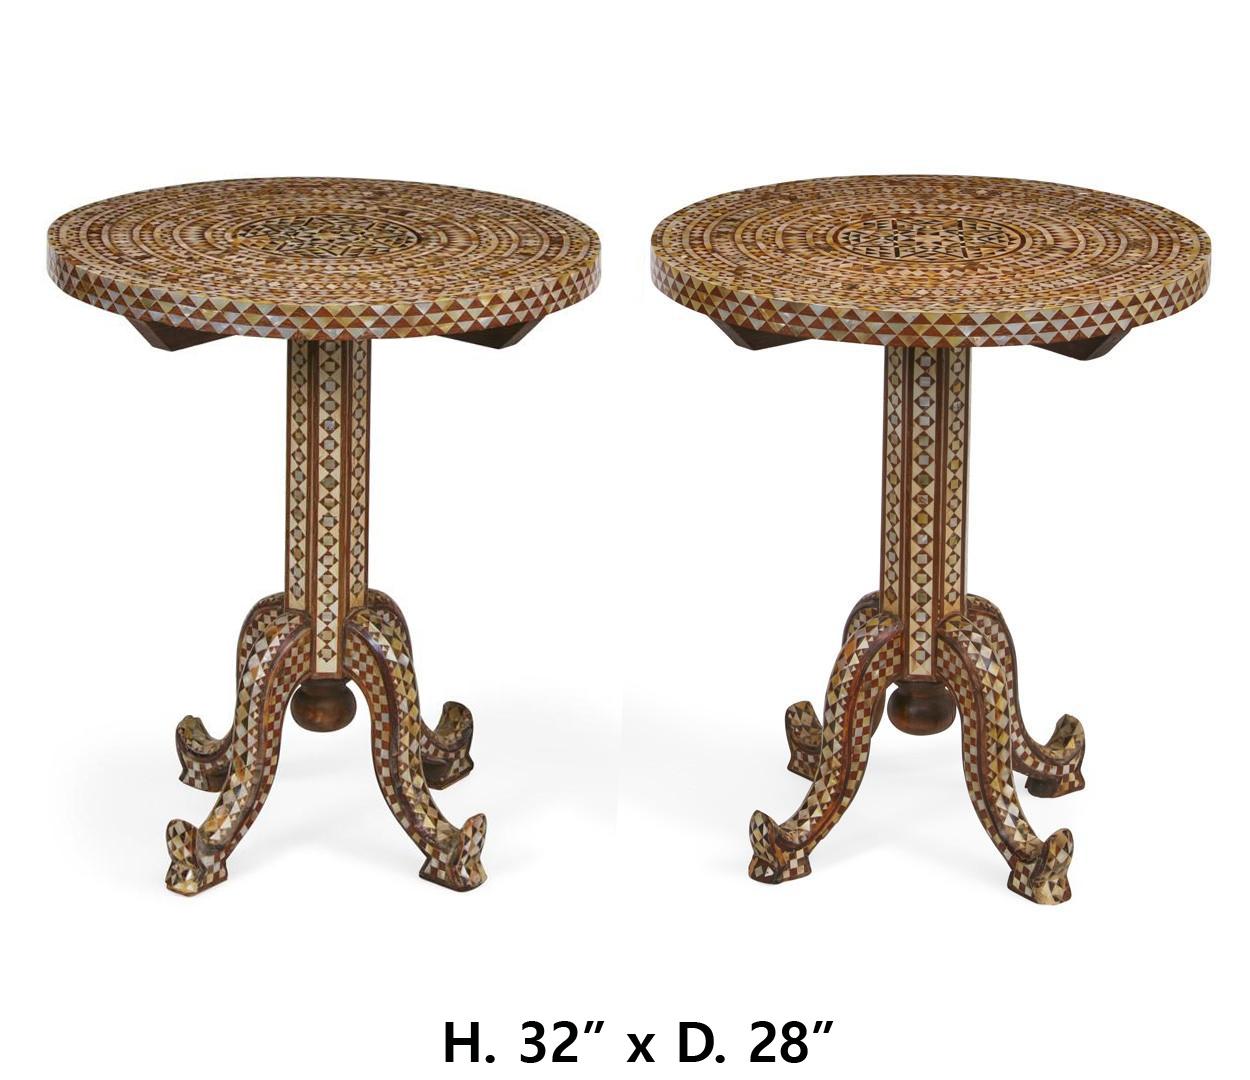 Late 19th / early 20th pair of Levantine mother of pearl,shell and horn inlaid round tables.
The round top over pedestal ending in four legs. 
•	Dimensions: height 32